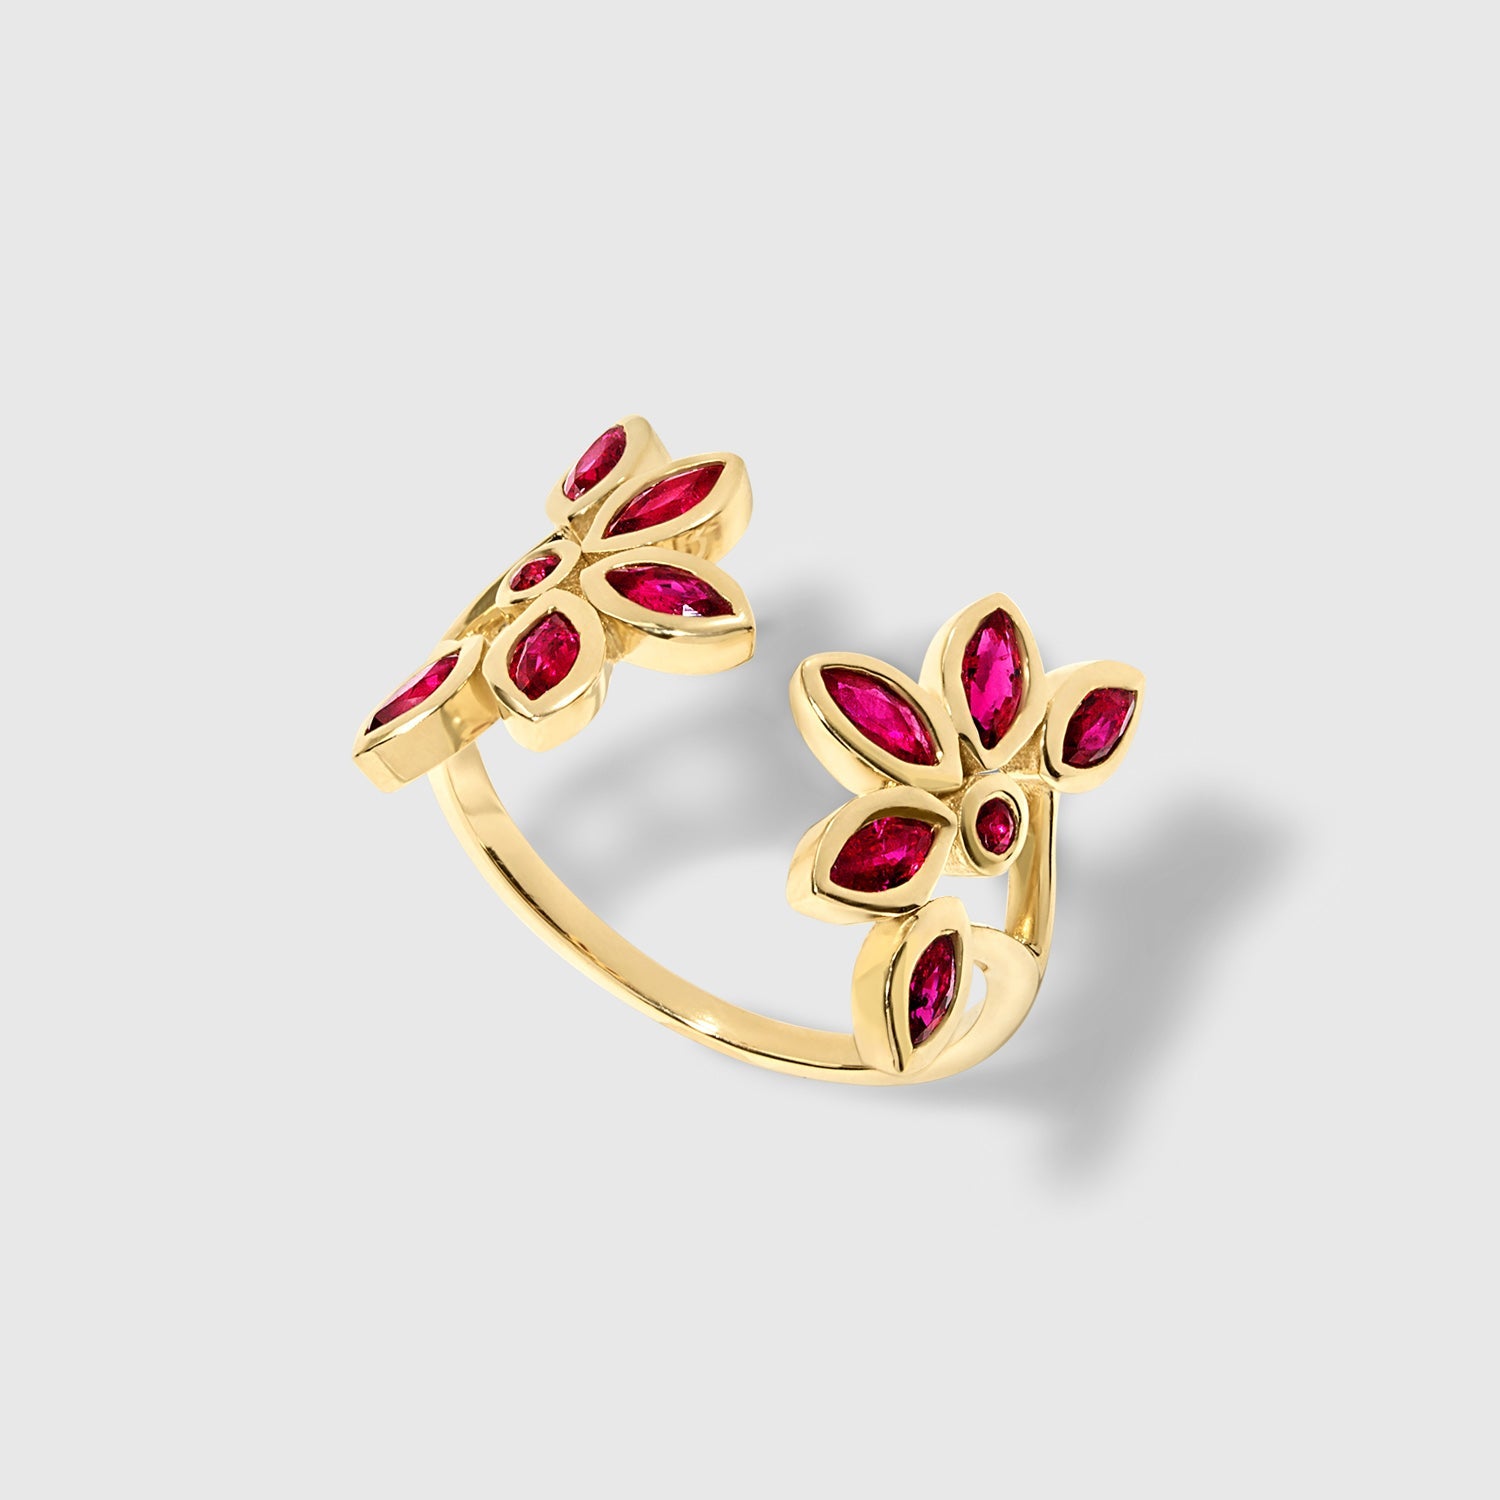 Amalia - Ruby Flower Open Ring – La Fleur Rouge Collection of Rubies & Solid Gold - Aurora Laffite Jewelry